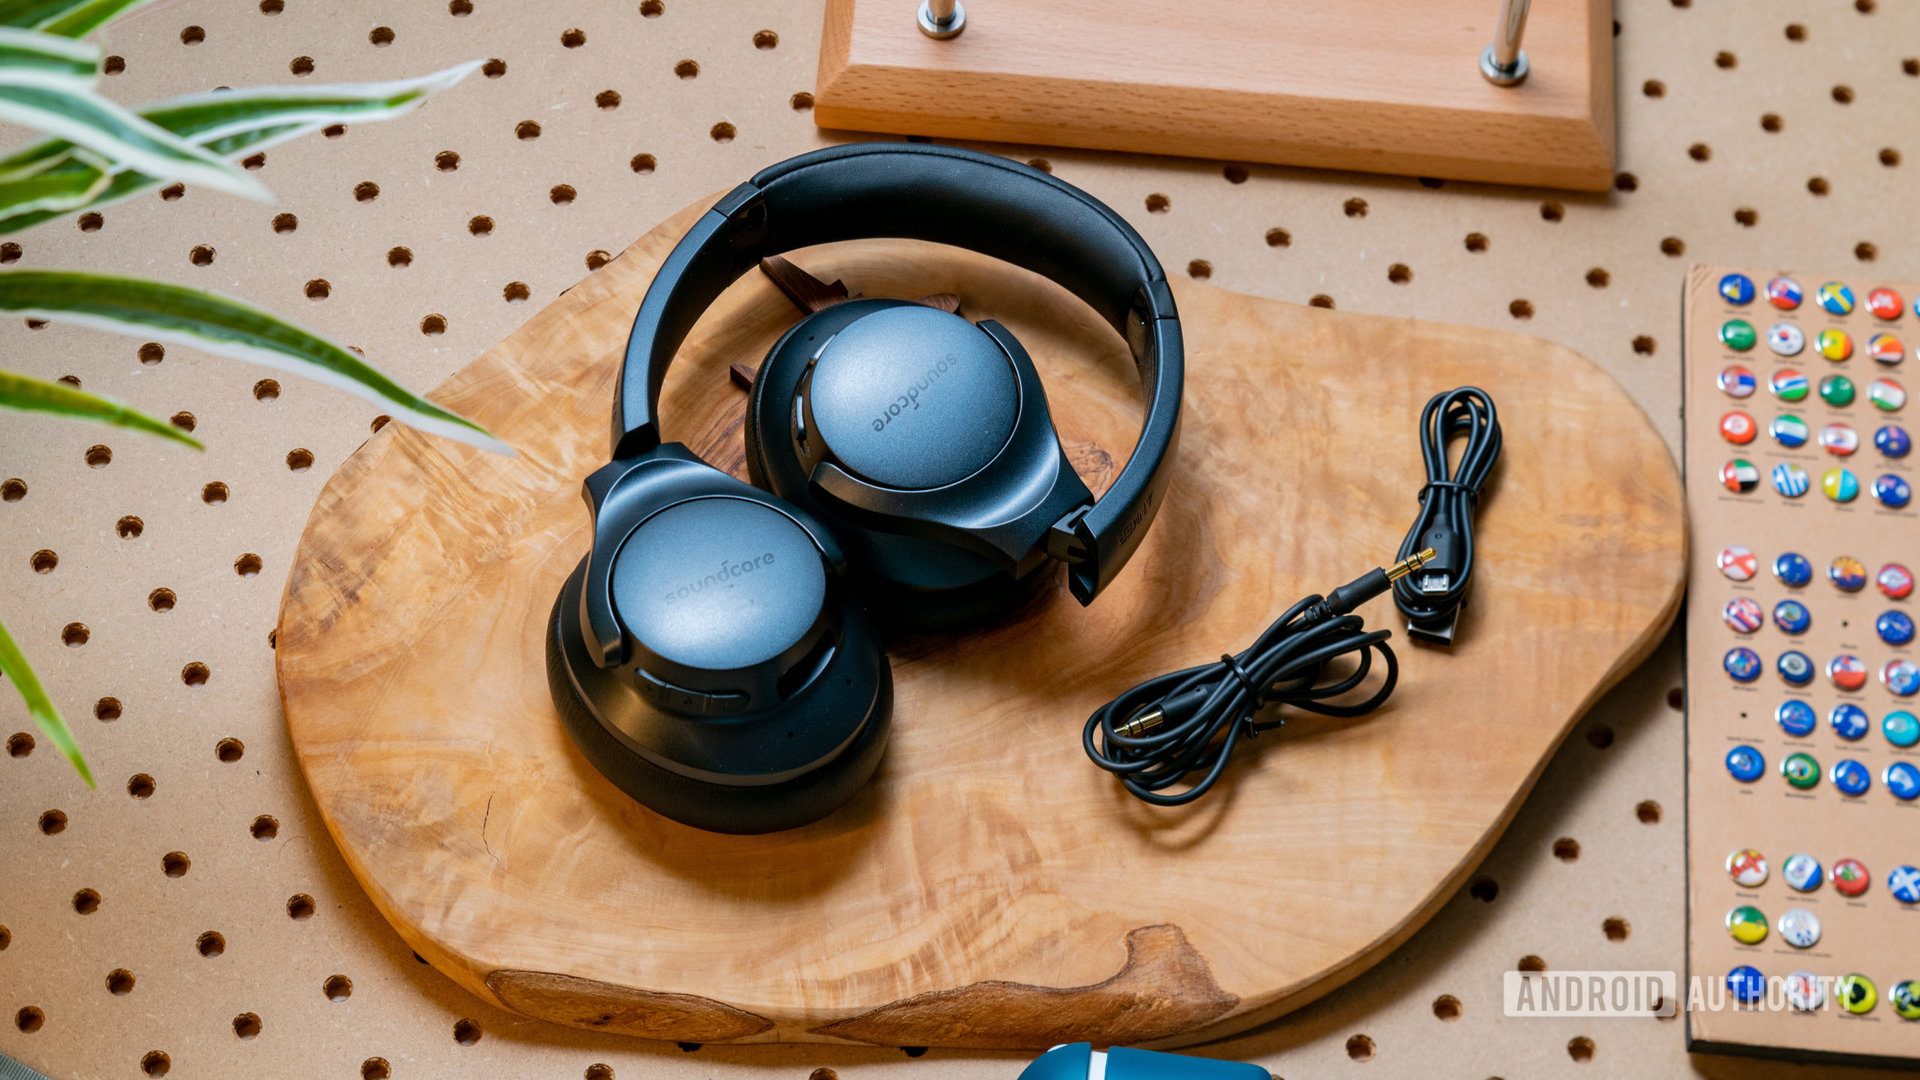 The Anker Soundcore Life Q20 wireless noise cancelling headphones folded up on a wooden surface next to the included cables.